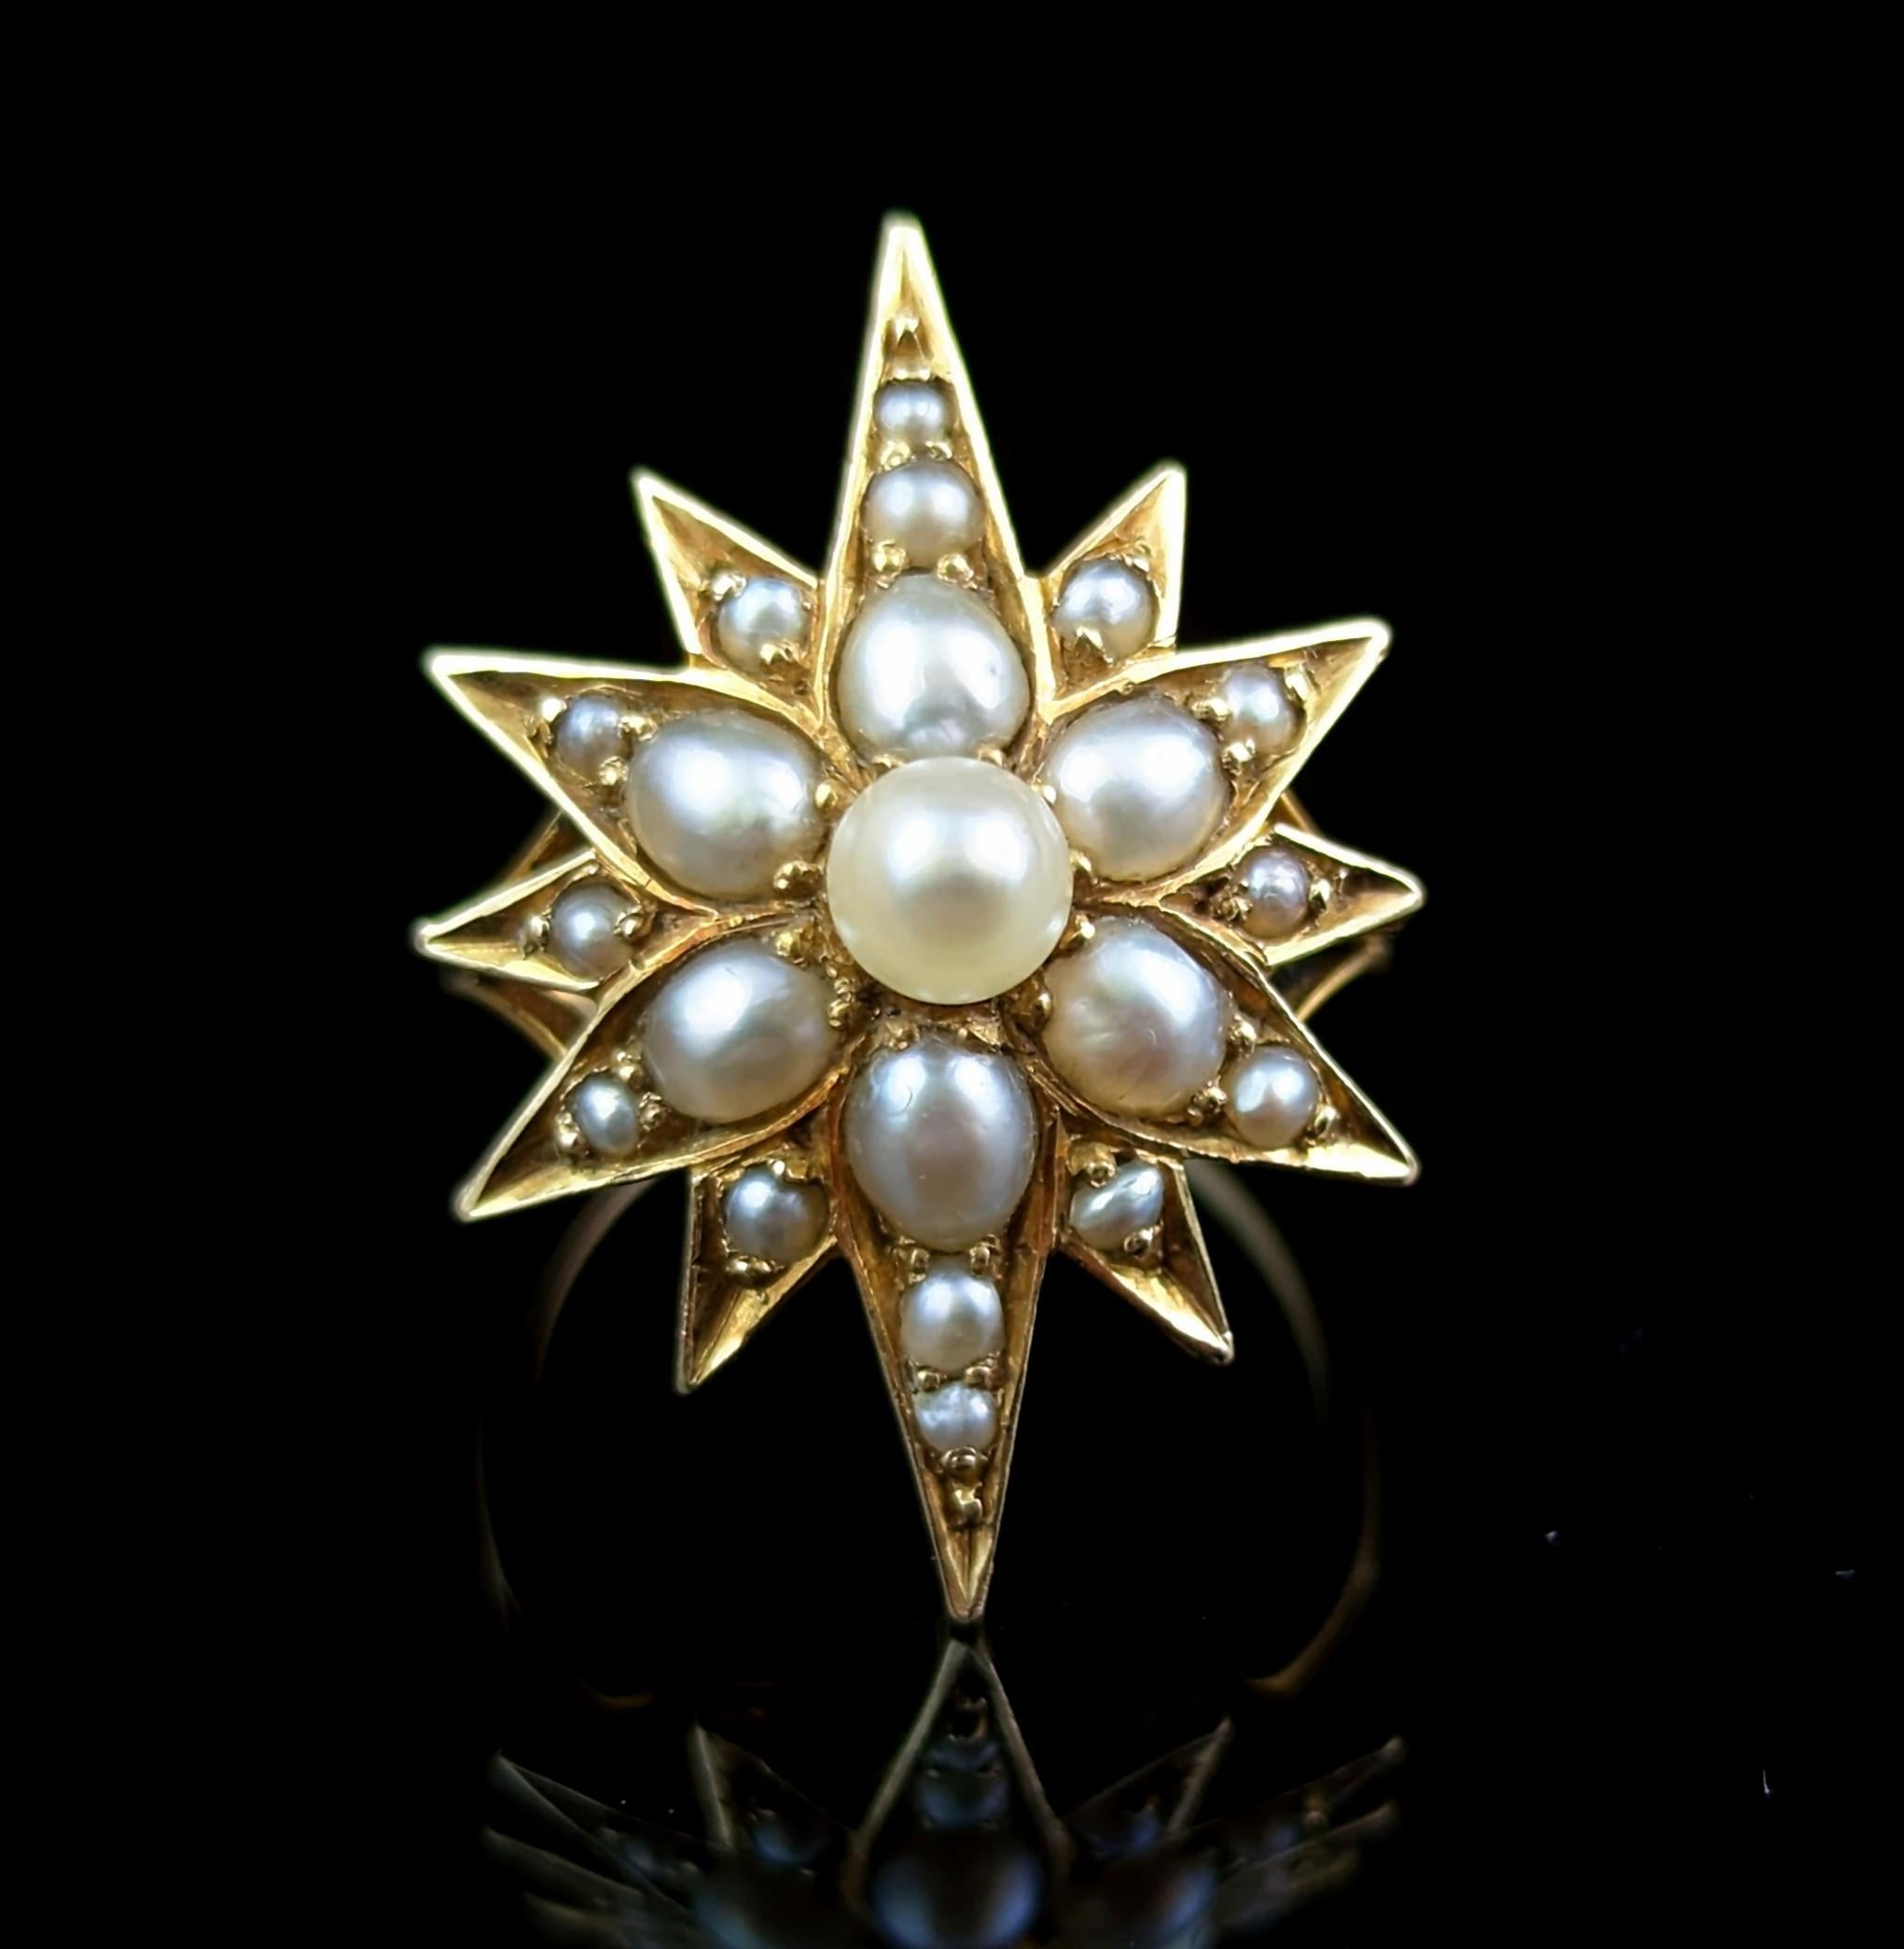 Look at this celestial wonder, a truly beautiful and unique 18ct gold star ring.

This is just a magnificent piece, originally this would have been a brooch made in the late Victorian era, turn of the century, it has been later converted into a ring